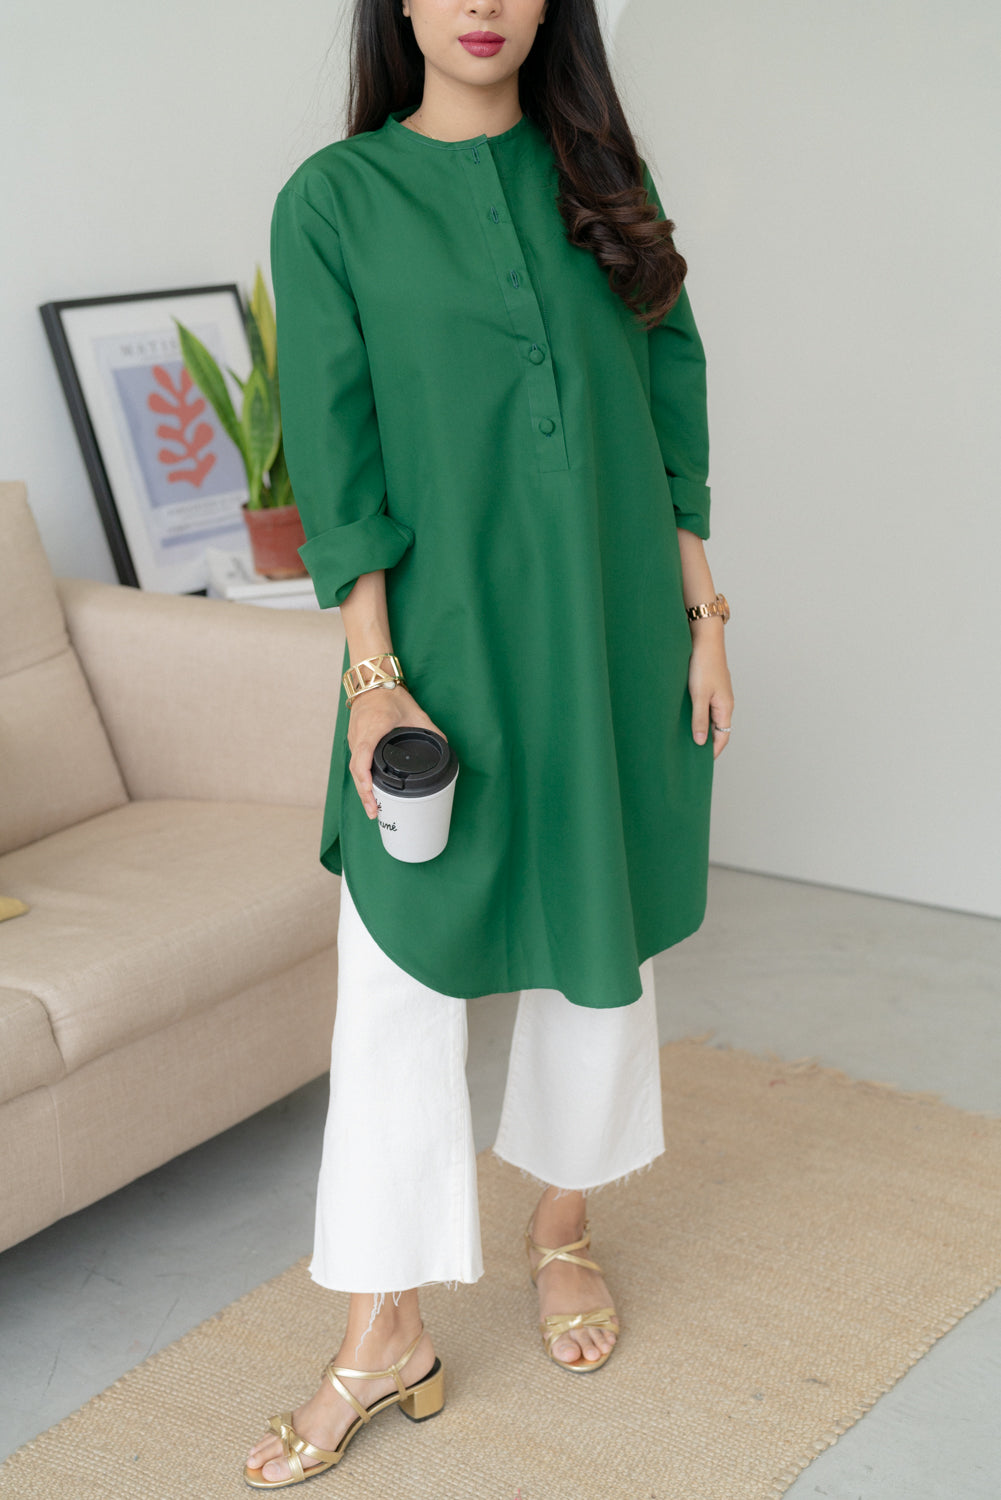 IVY Blouse in Green